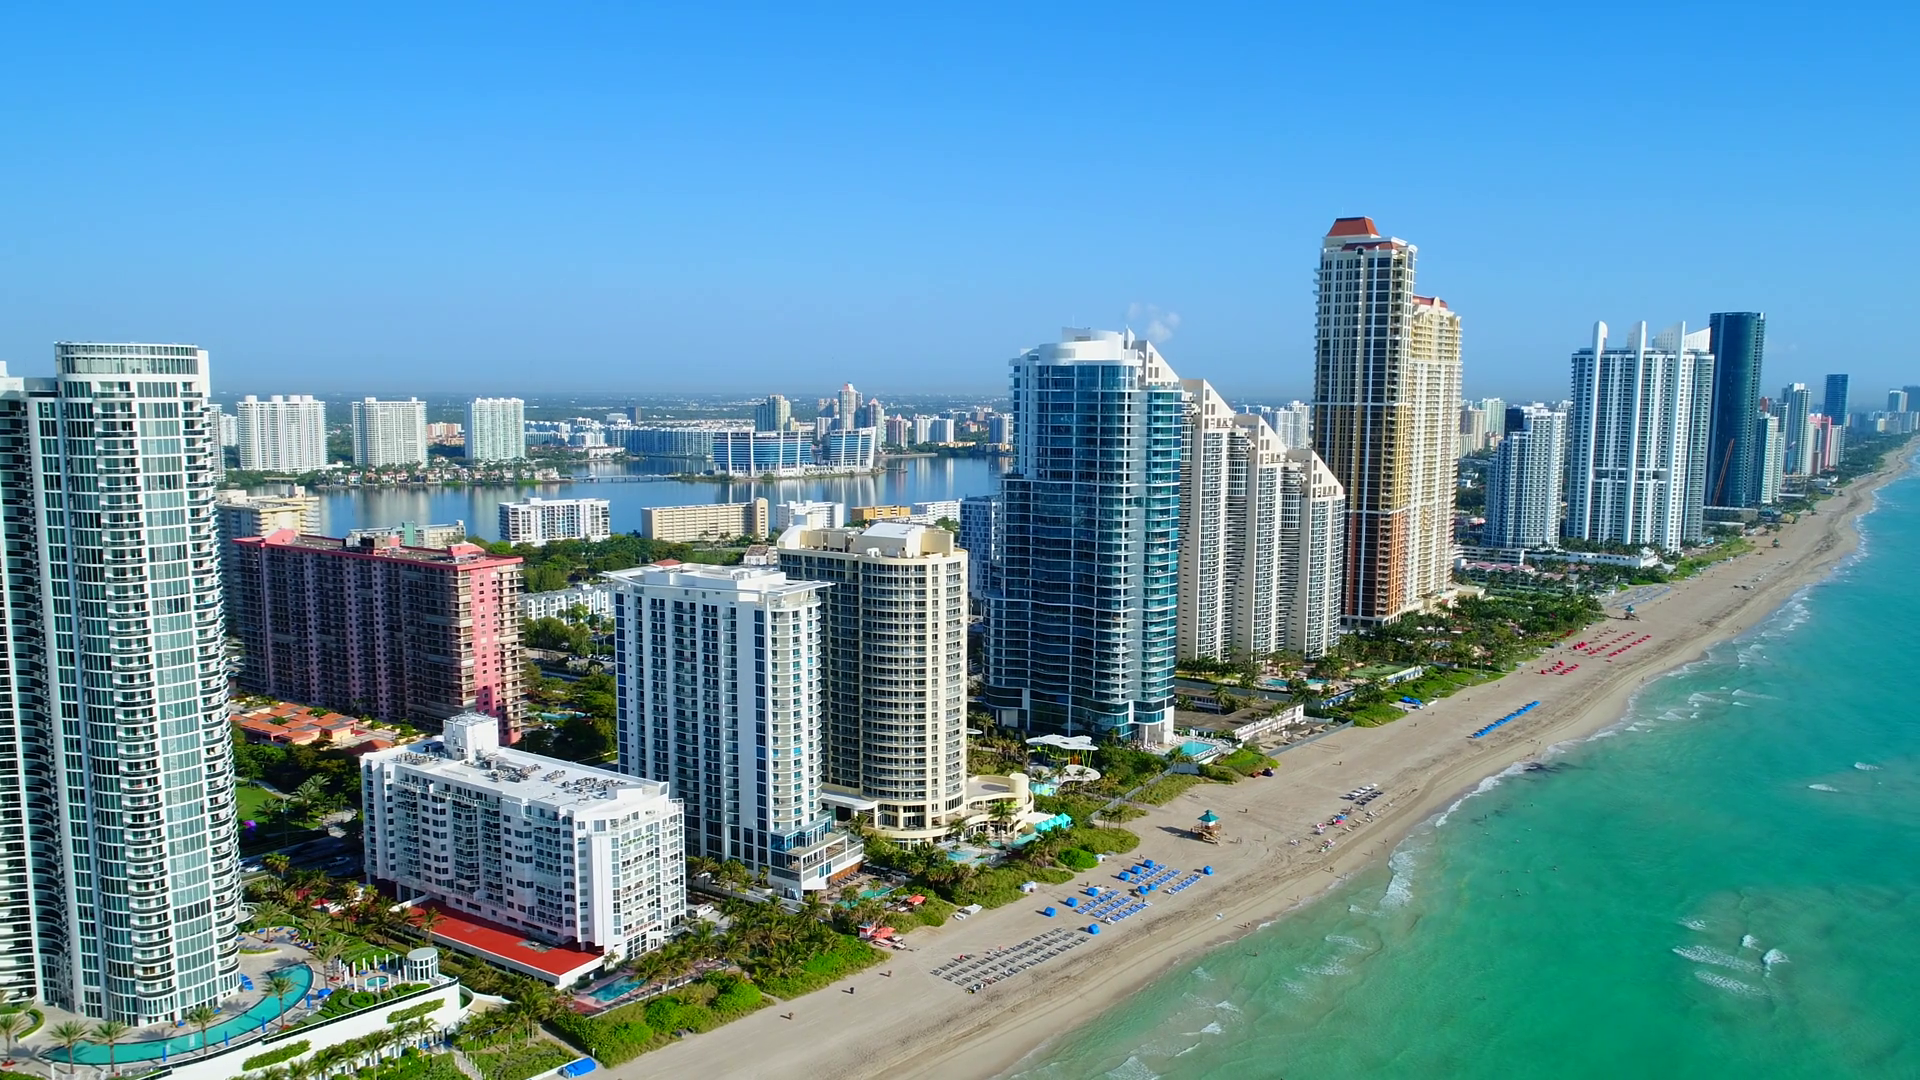 Sunny Isles: Transformed by major developments, city faces challenges to increase retail component